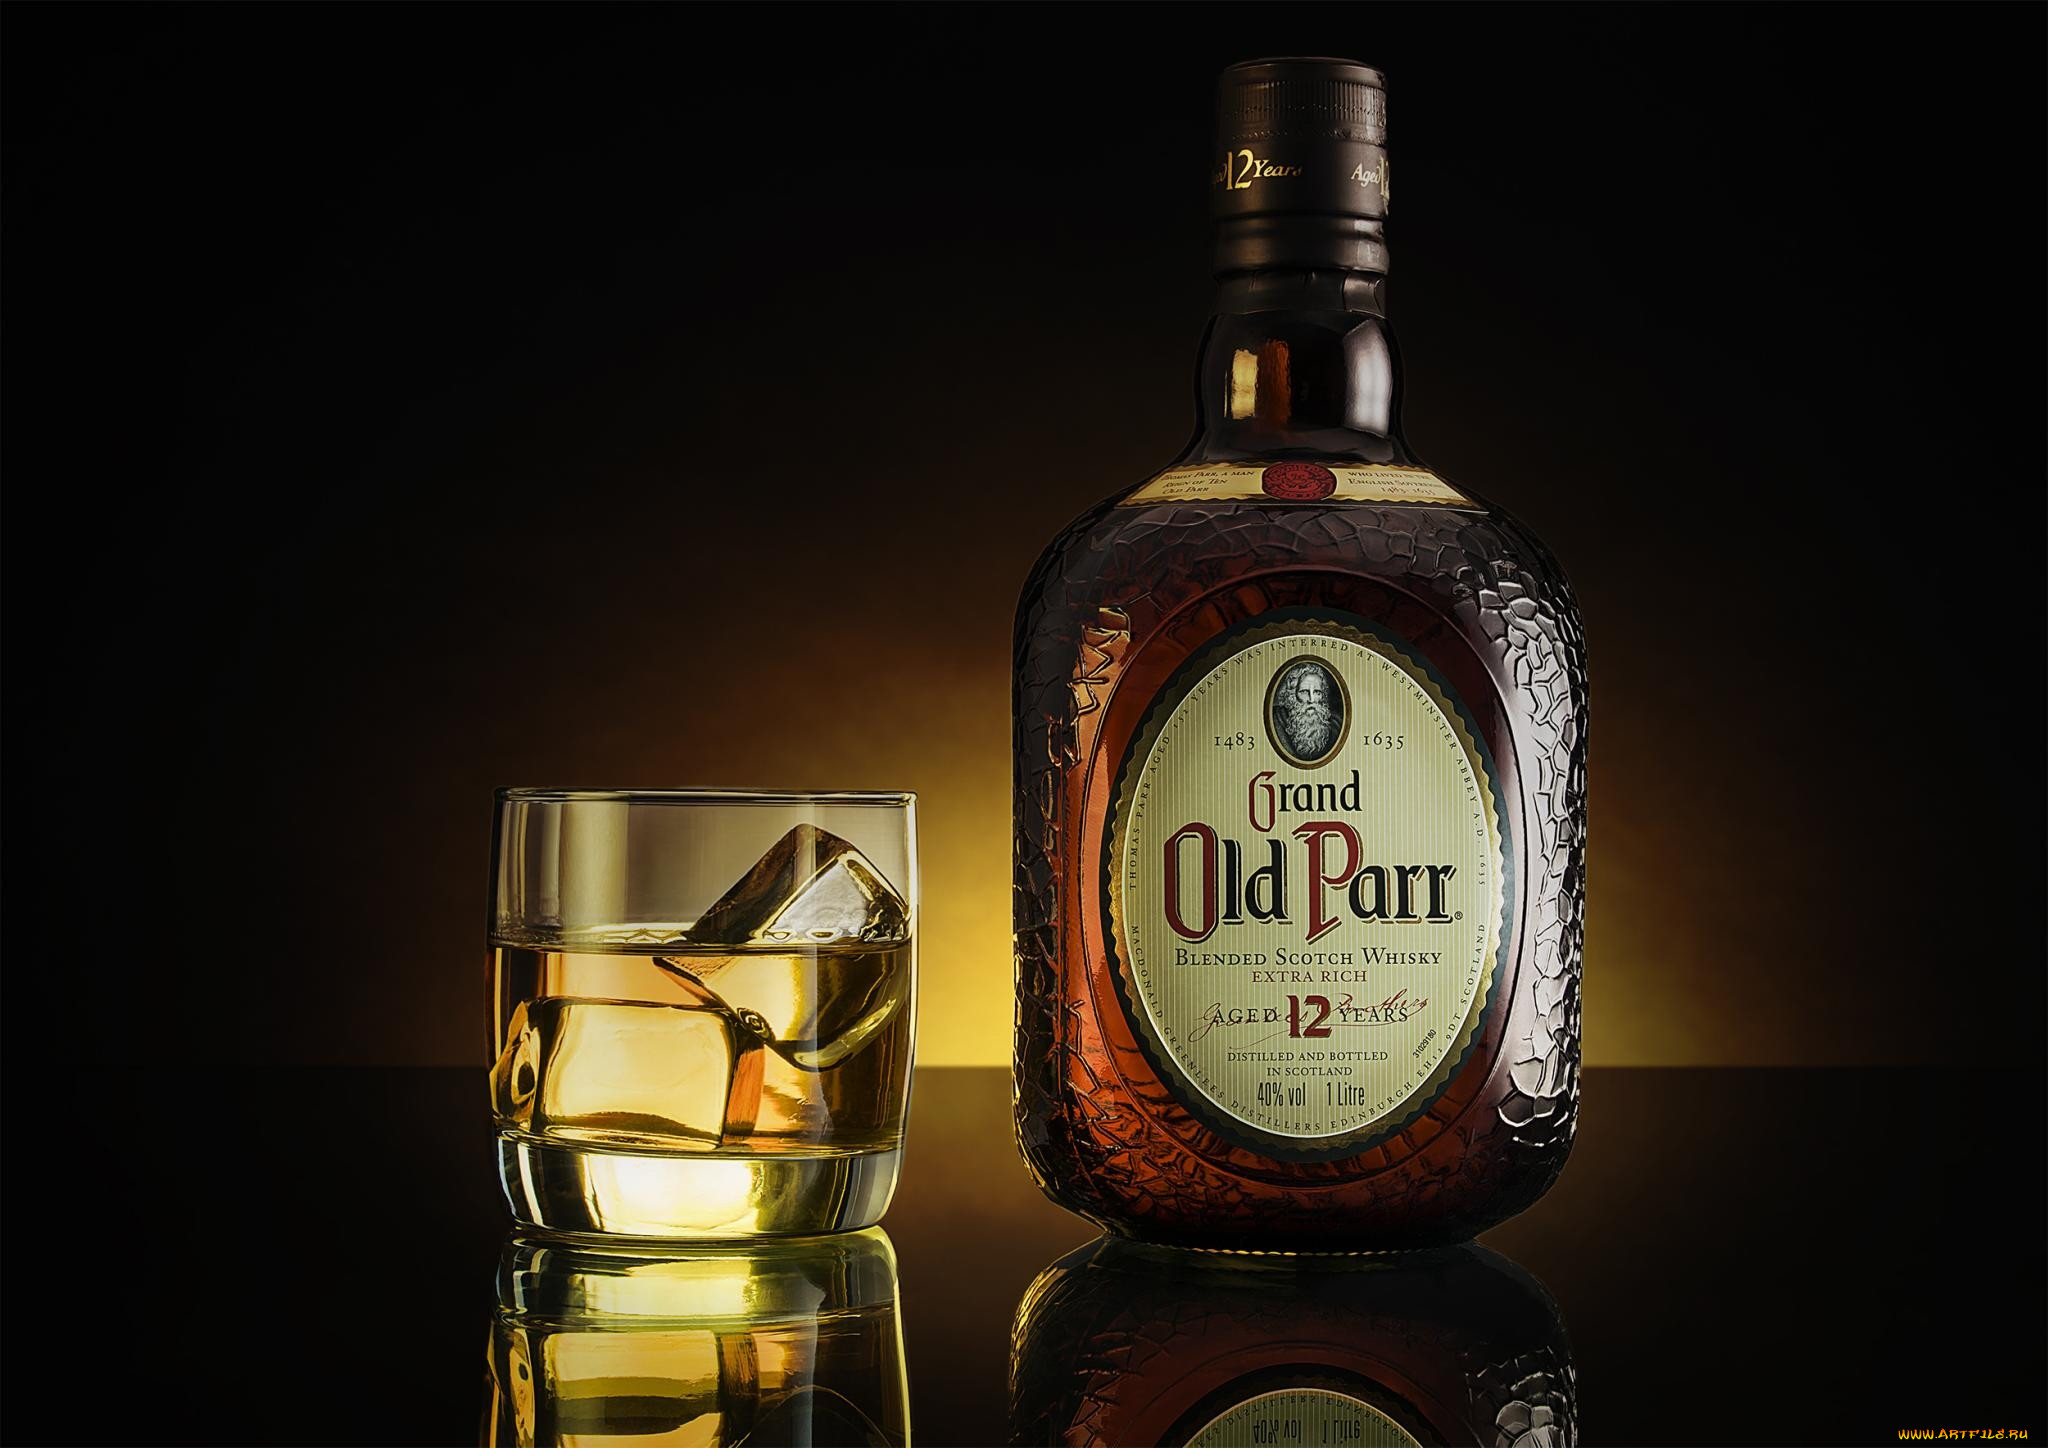 grand old parr, , , , , , , scotch, whisky, grand, old, parr